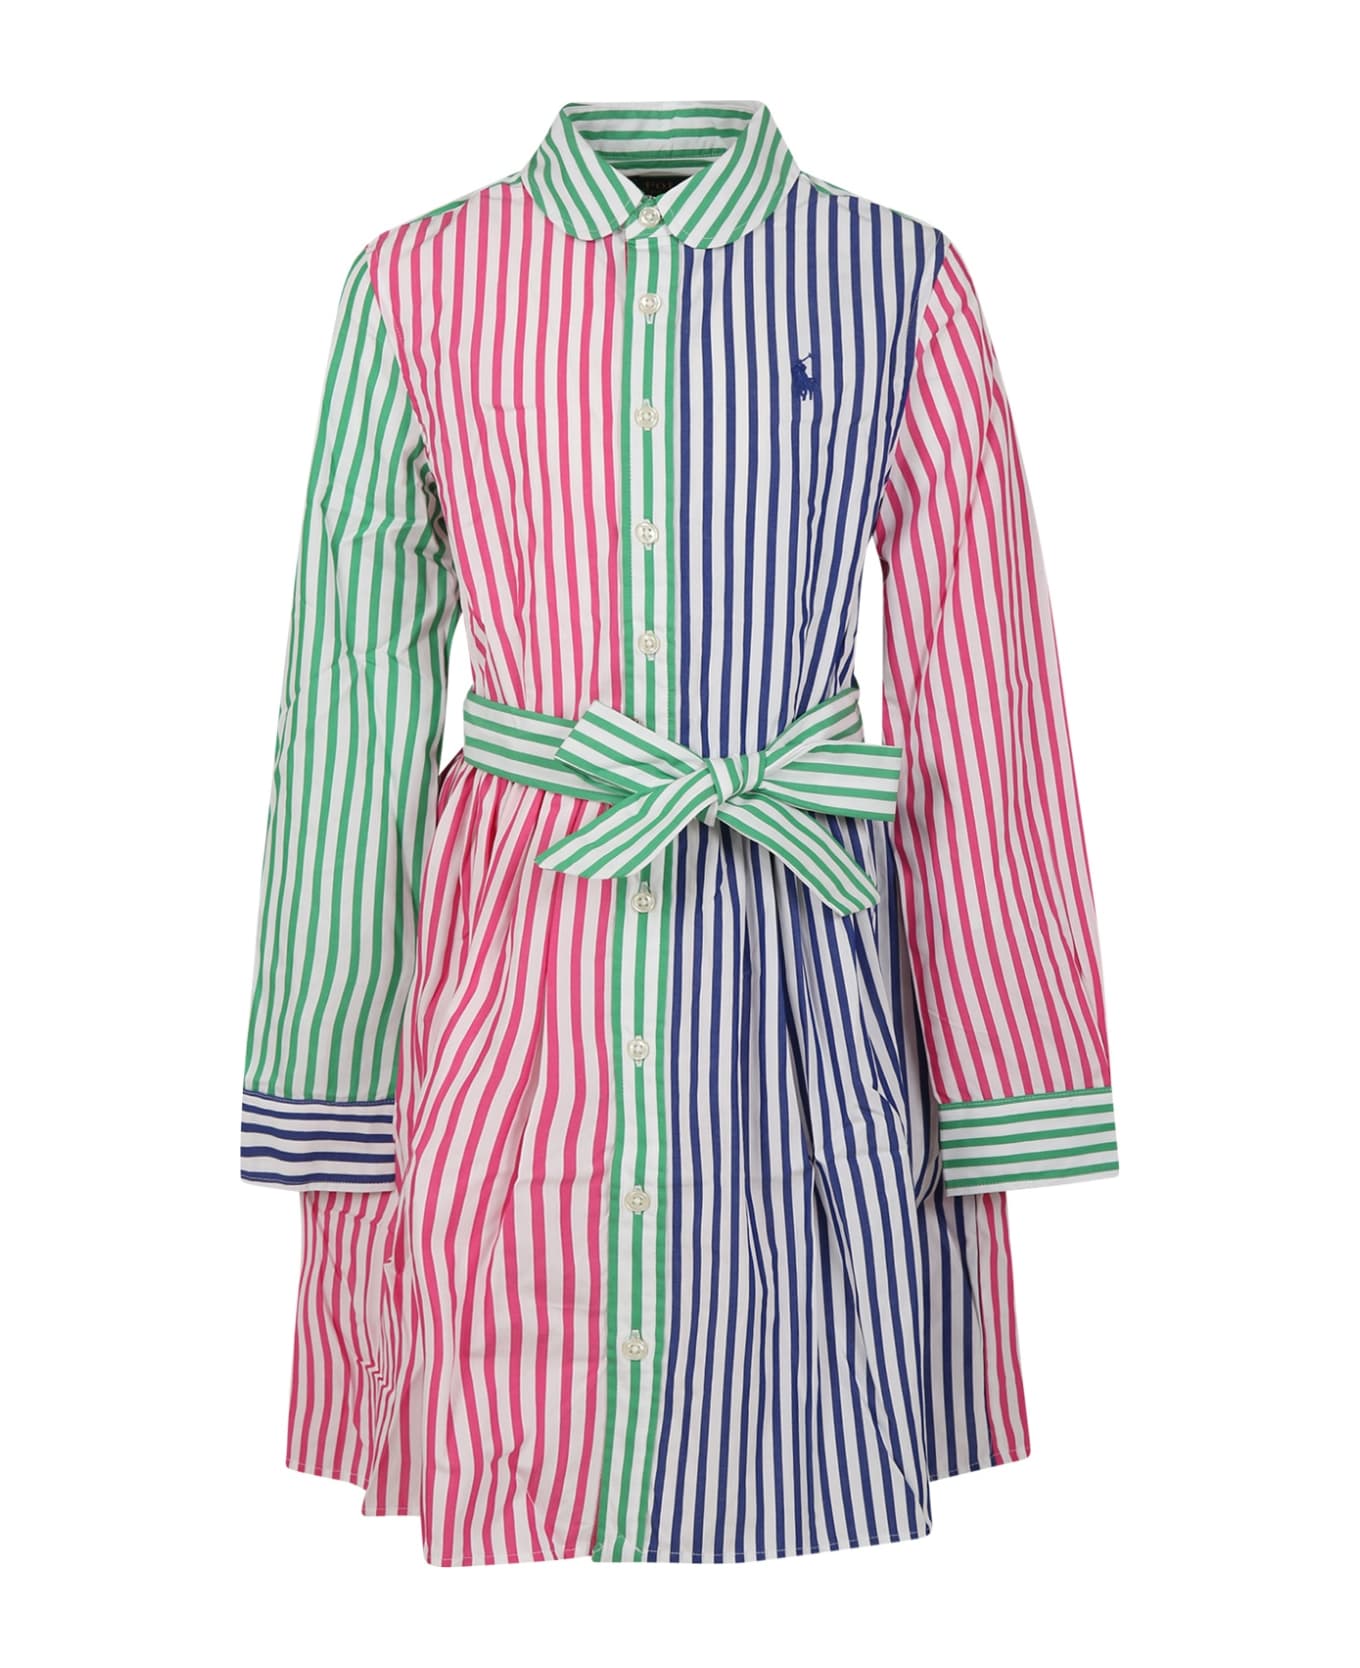 Ralph Lauren White Dress For Girl With Pony - Multicolor